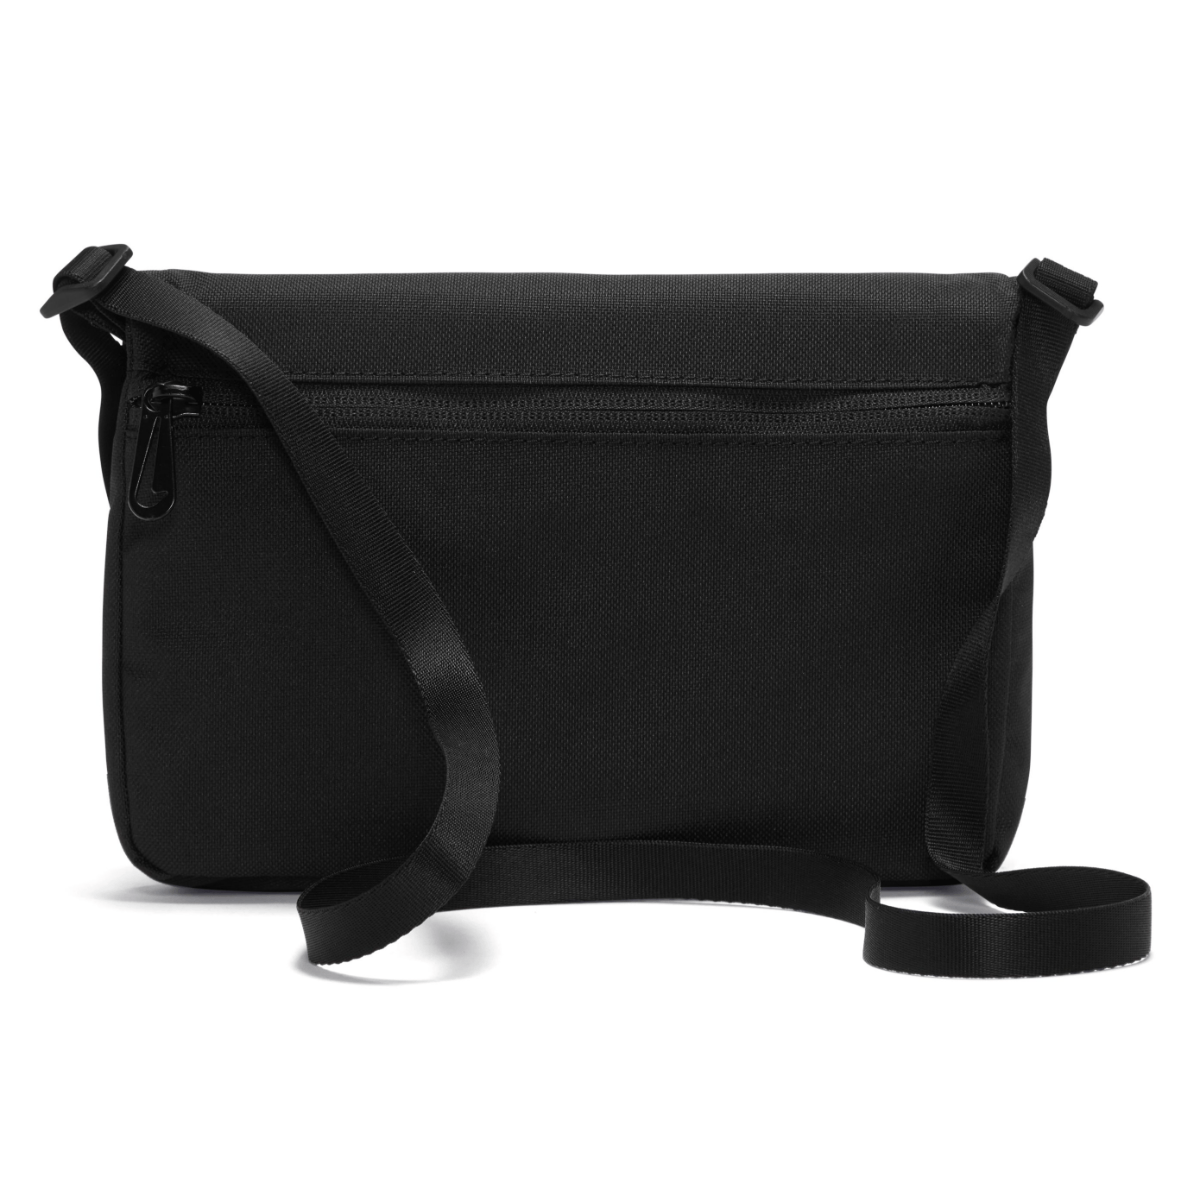 Shop Nike Cross Body Bags for Men up to 85% Off | DealDoodle